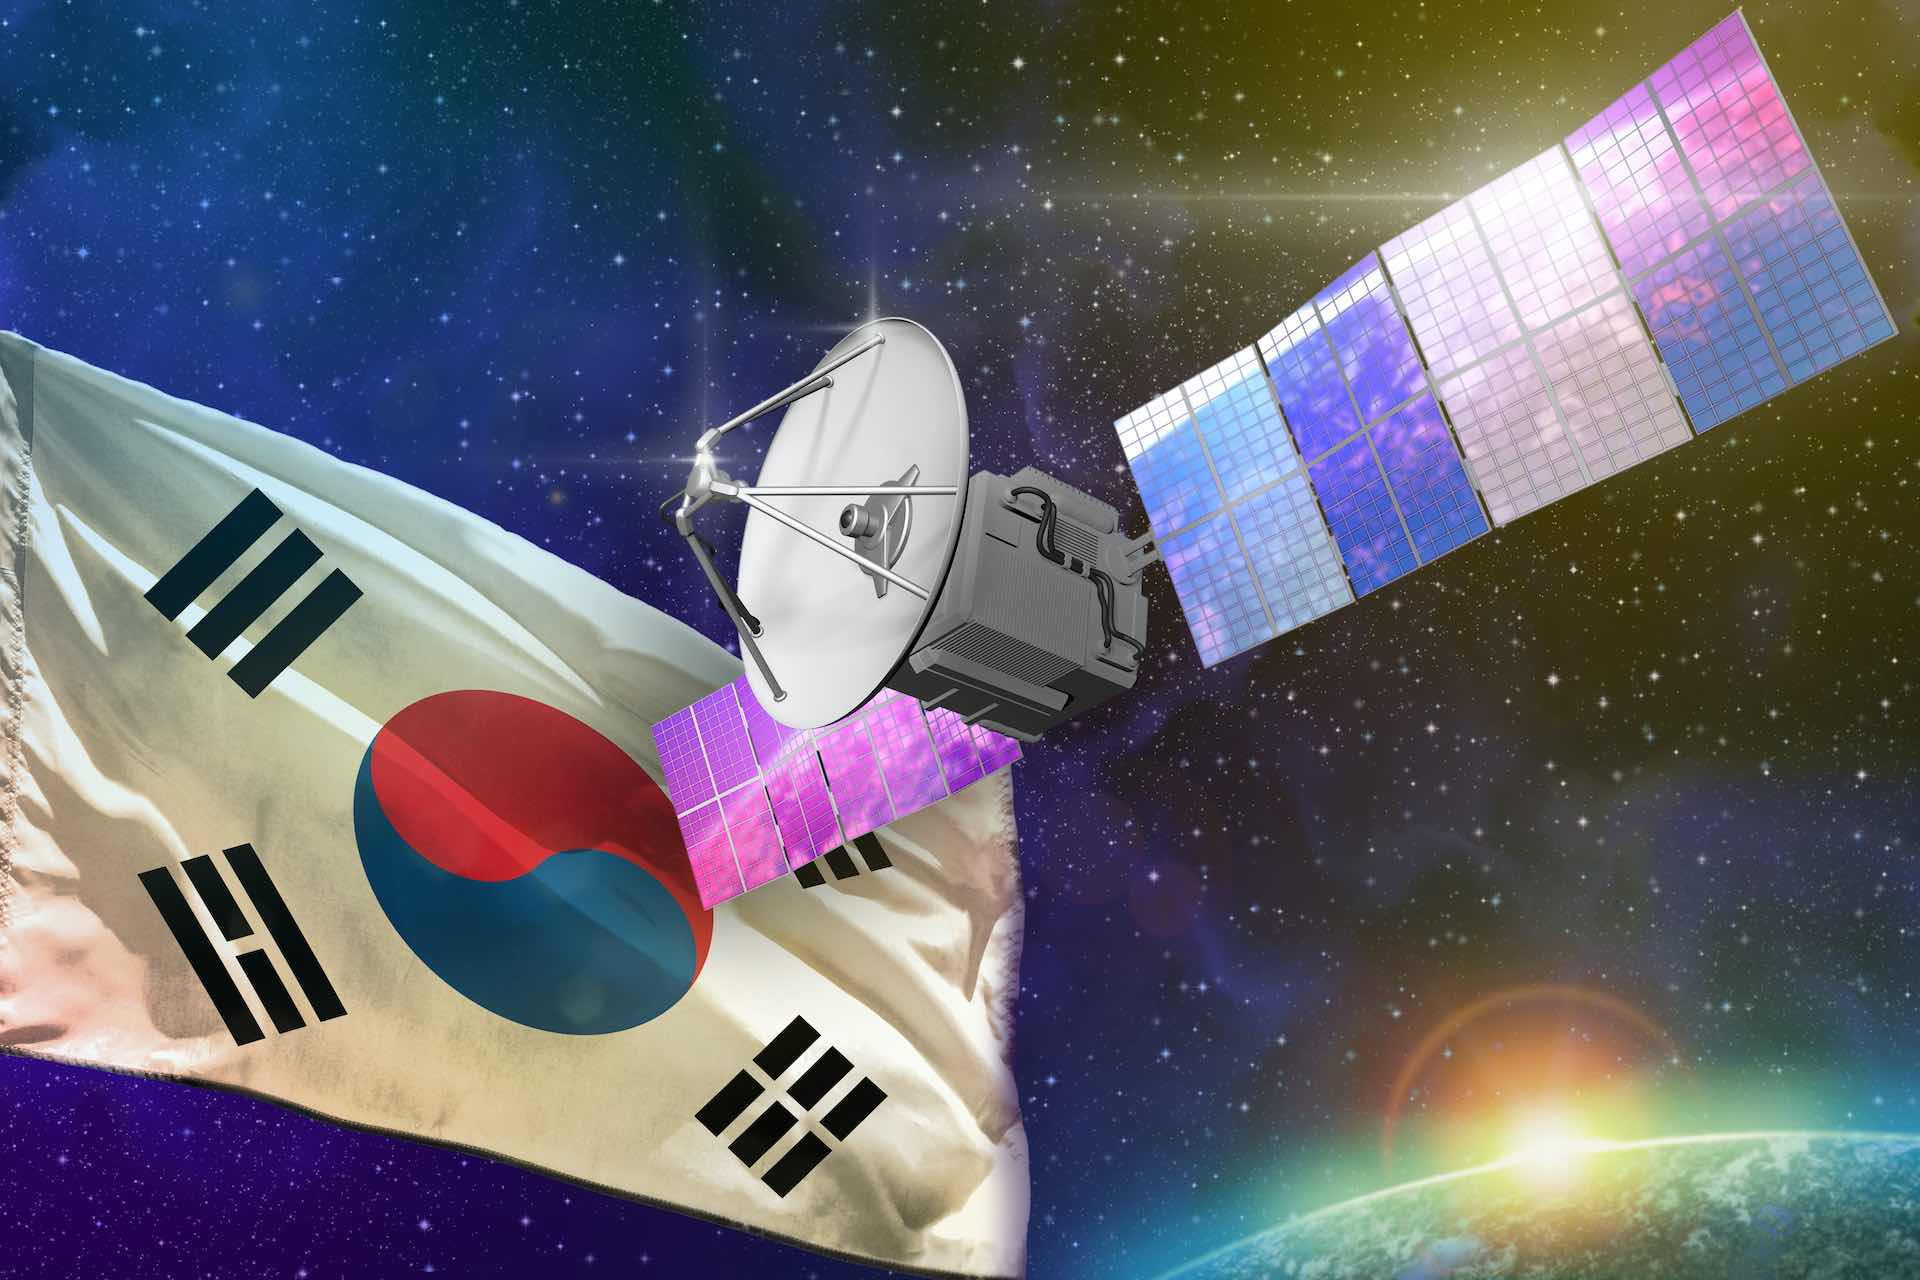 South Korea launches its first lunar mission